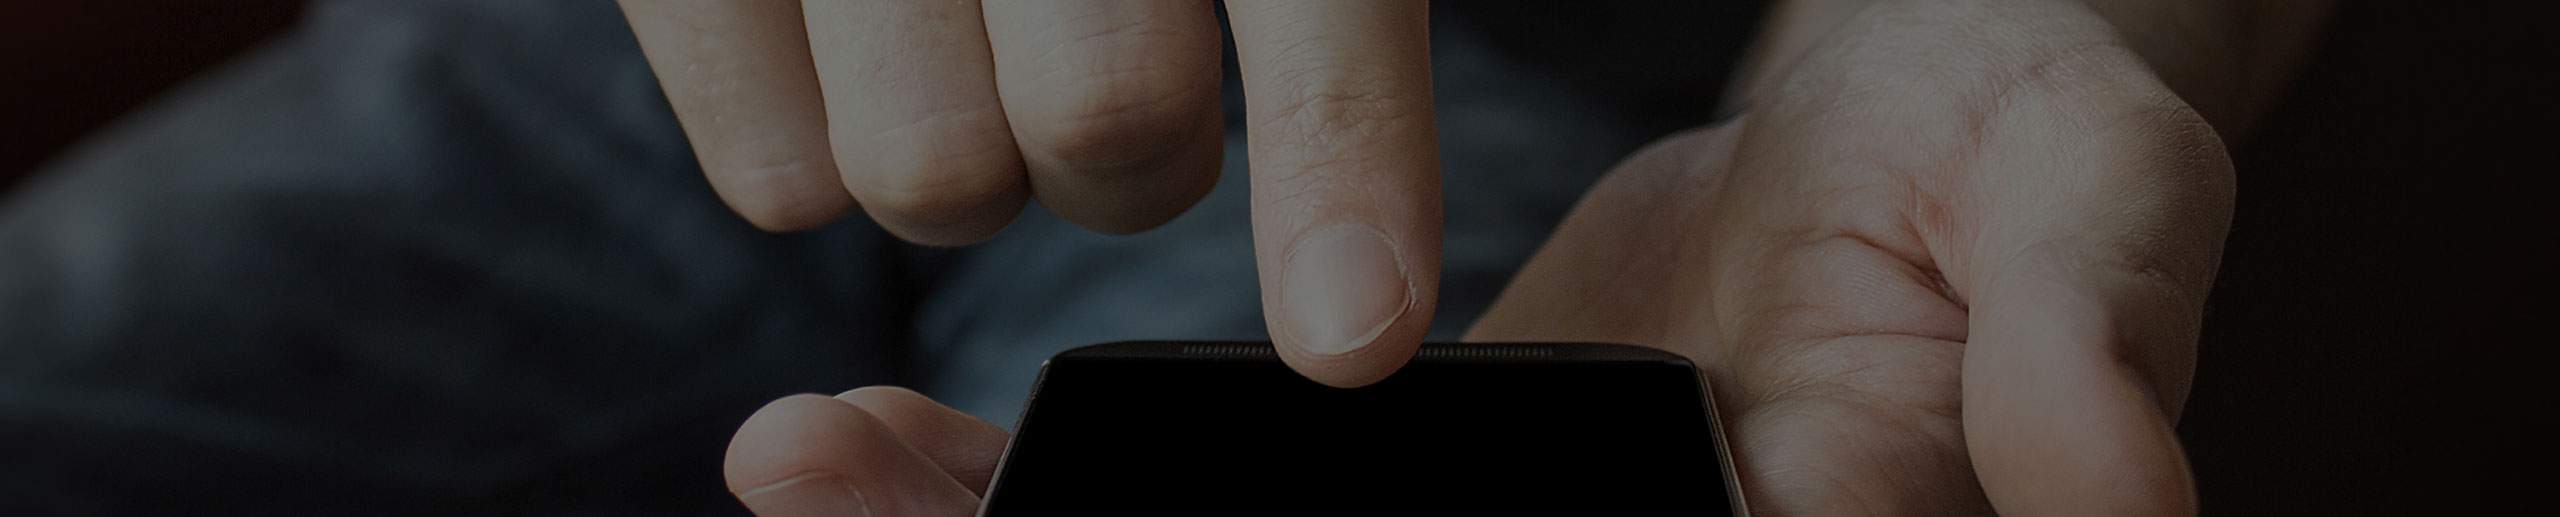 A person touching their phone screen